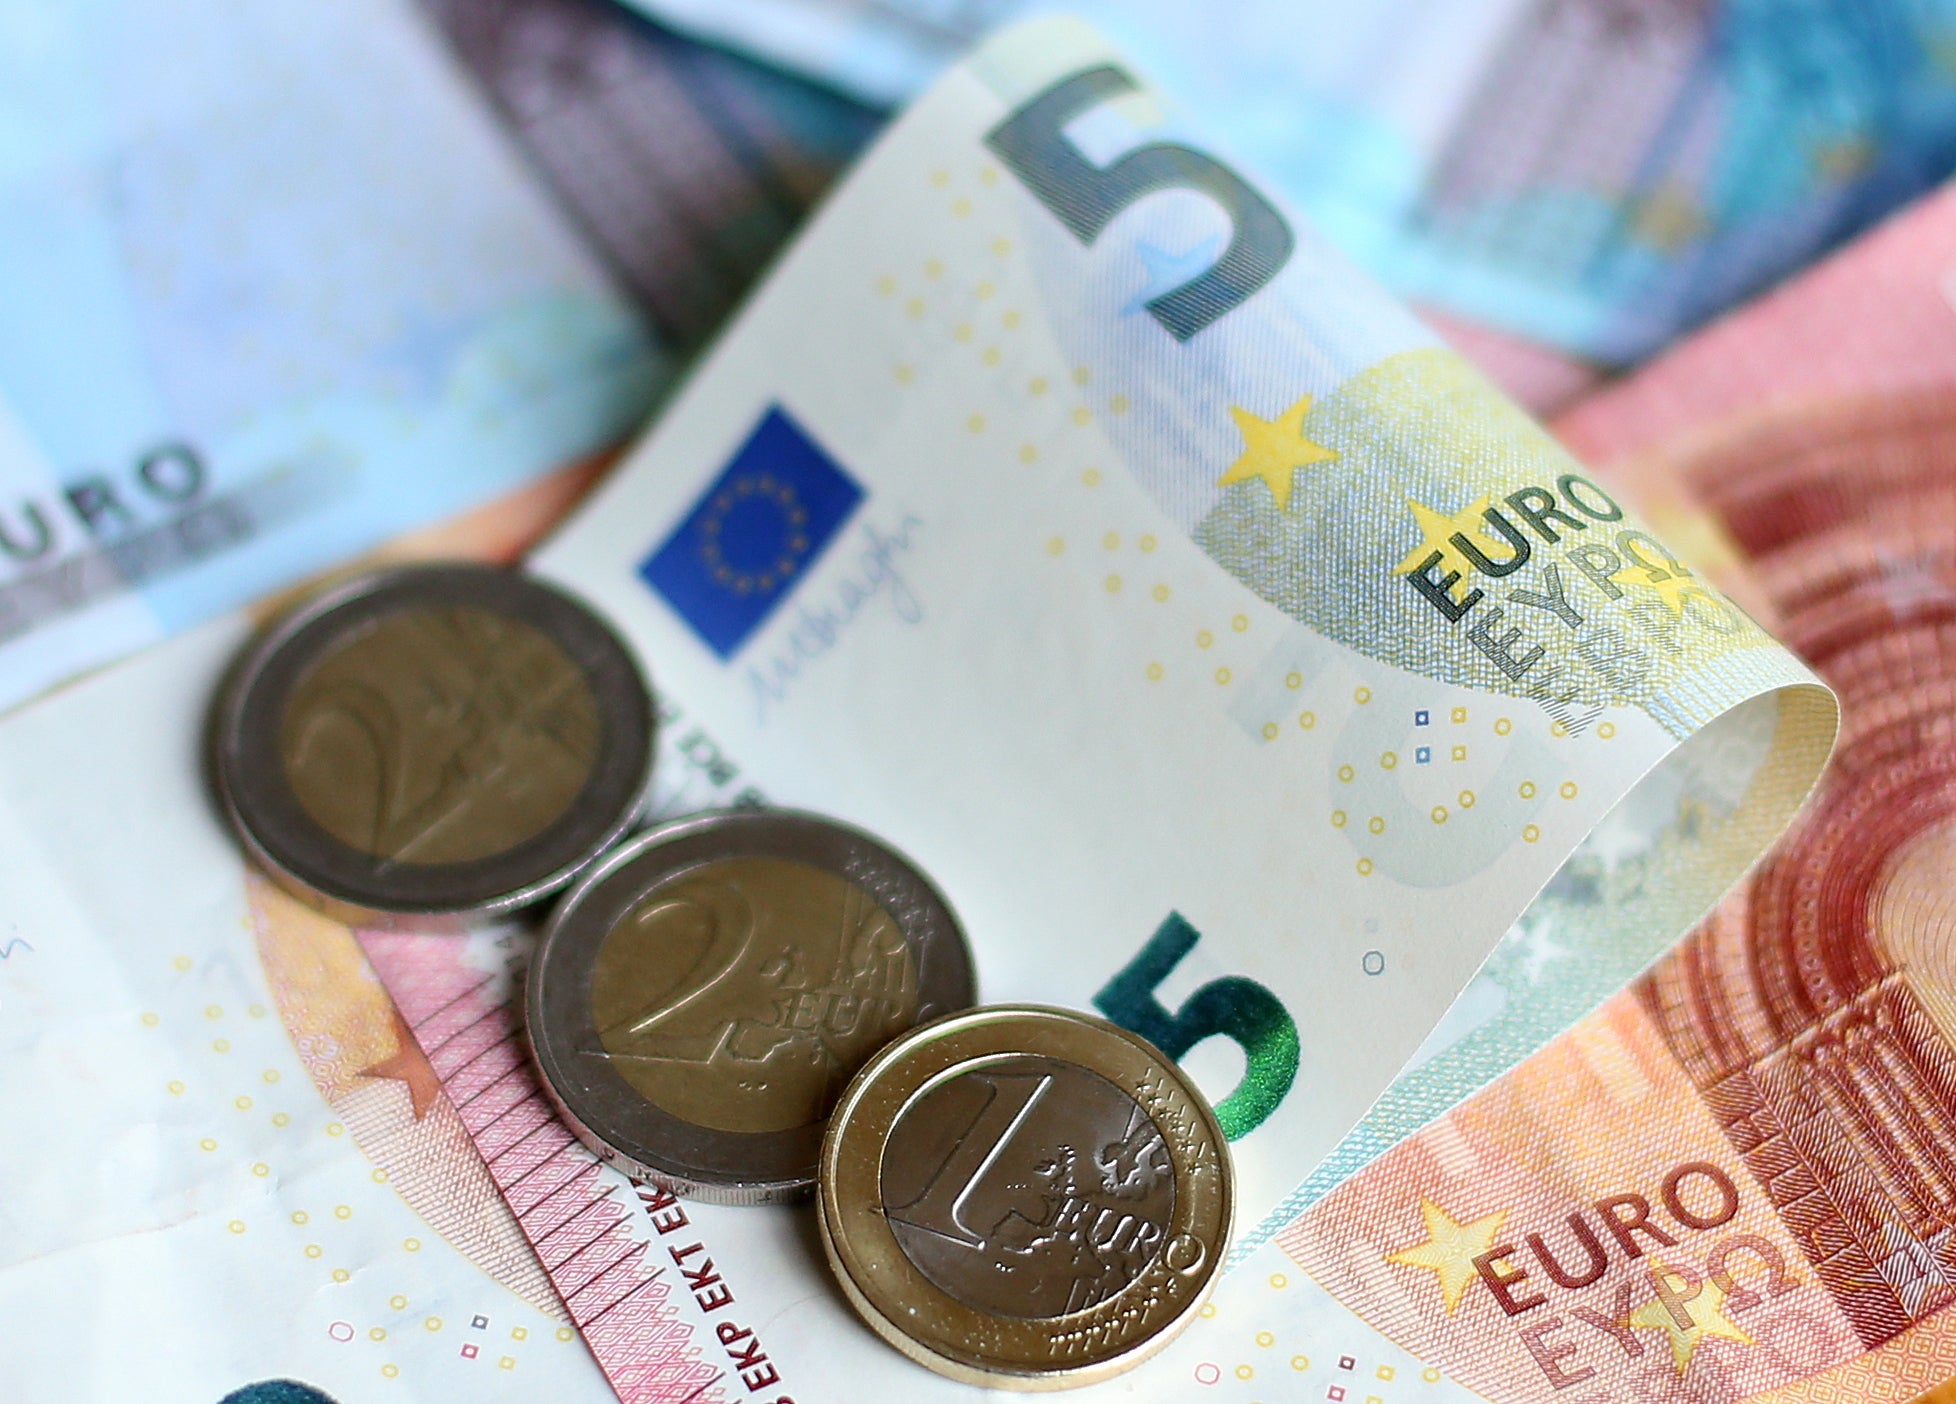 Sinn Fein’s Pearse Doherty called on the Government to give direct payments of 200 euro to individuals on incomes of 30,000 euro or less (PA)